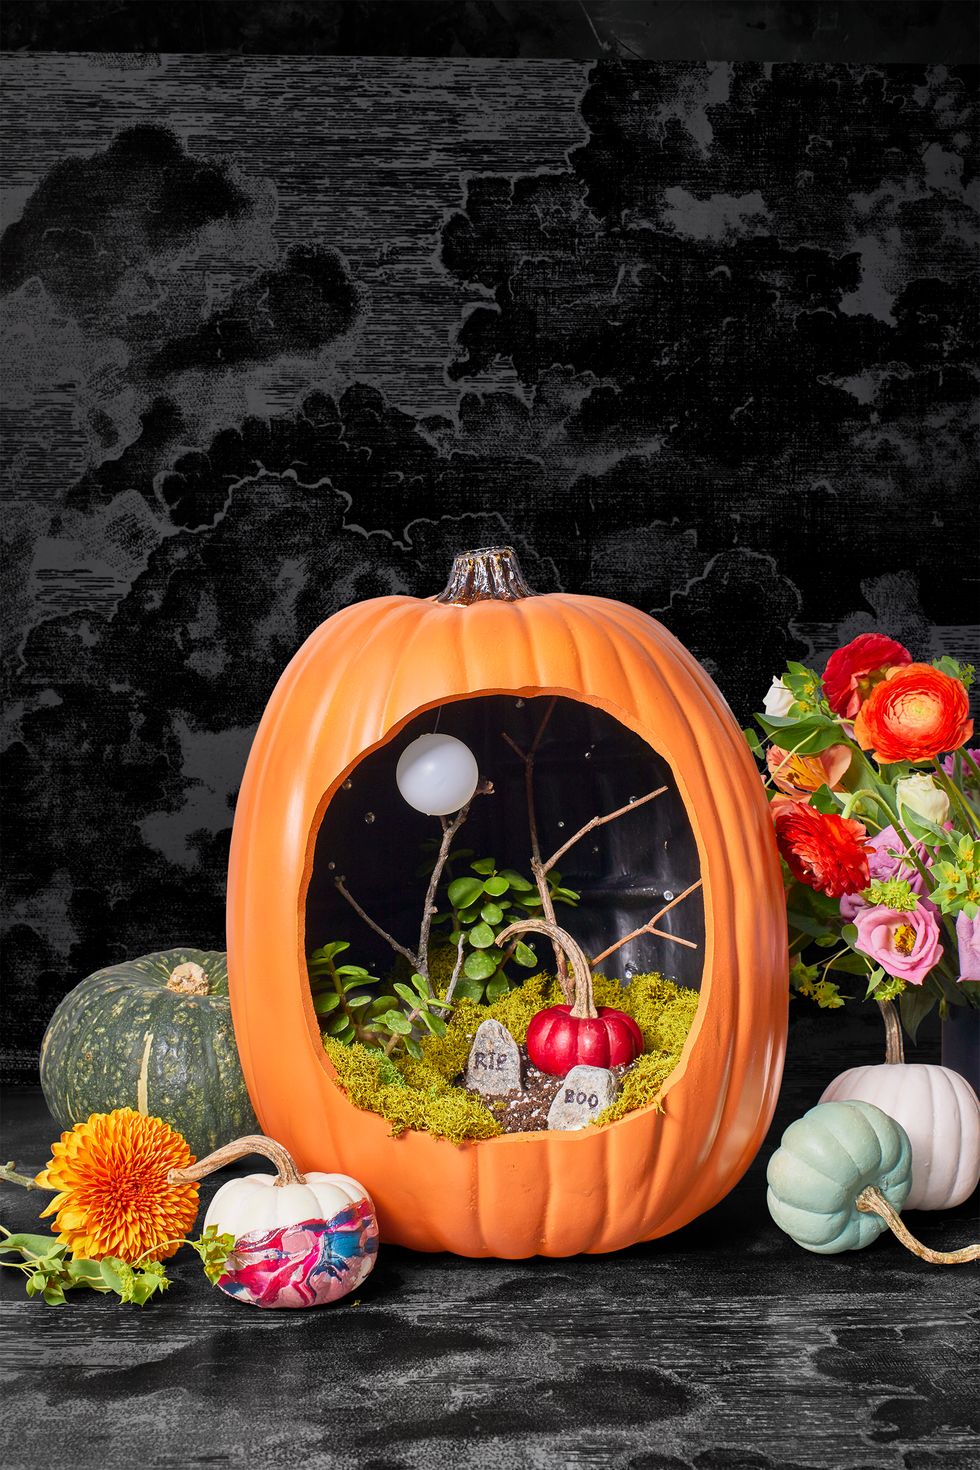 pumpkin carving ideas, carved out pumpkin with a gravestone scene inside, diorama